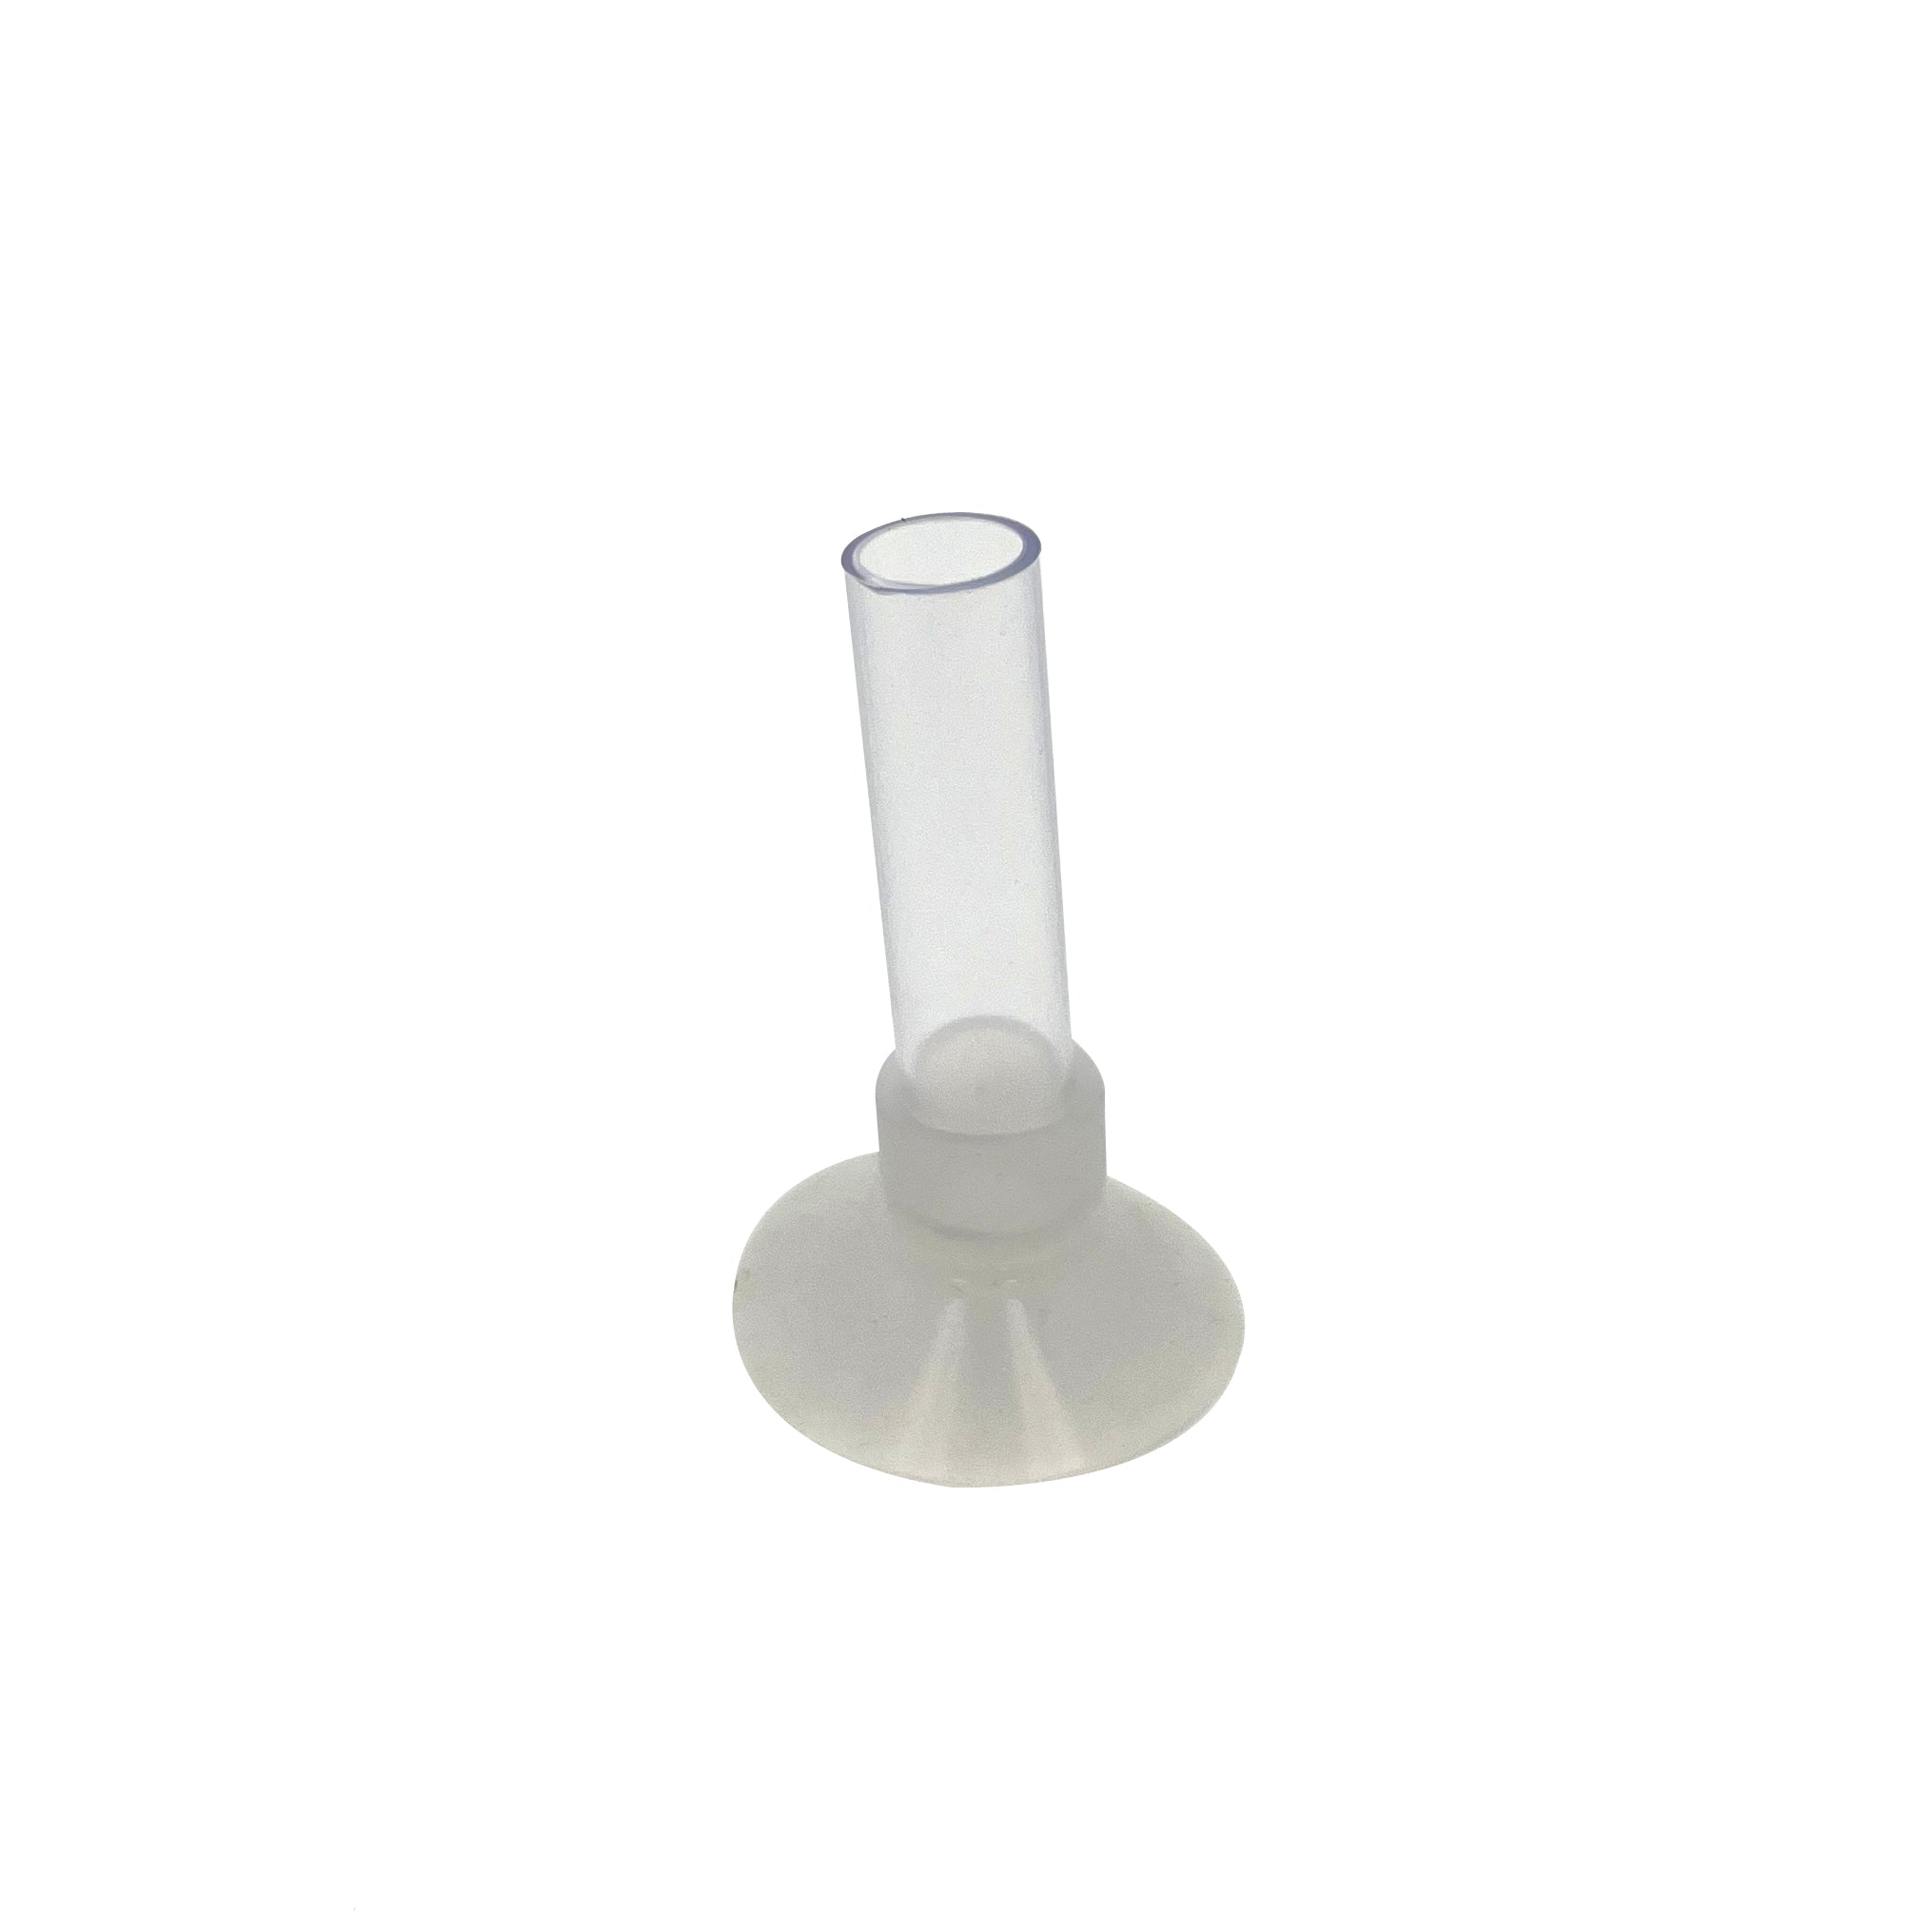 Replacement Top Seal With Rigid Tube Assembly For Ceramic Pet Fountains